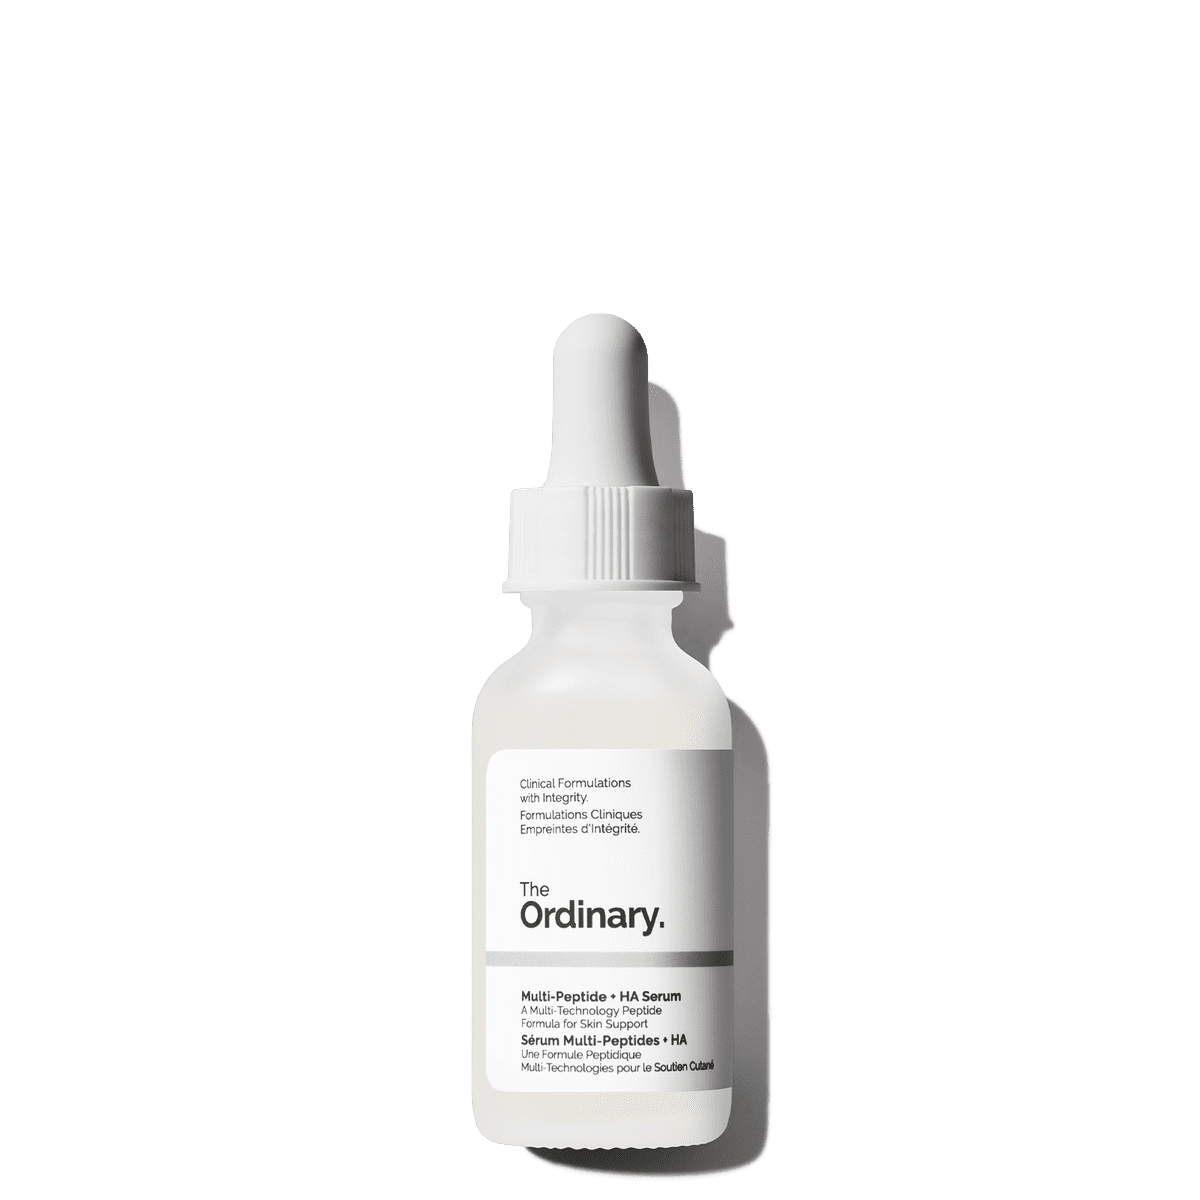 The Ordinary Multi-Peptide + HA Buffet Serum 30ml for youthful skin, diminishes fine lines and wrinkles, boosts collagen production for firmness, and deeply hydrates for a radiant complexion